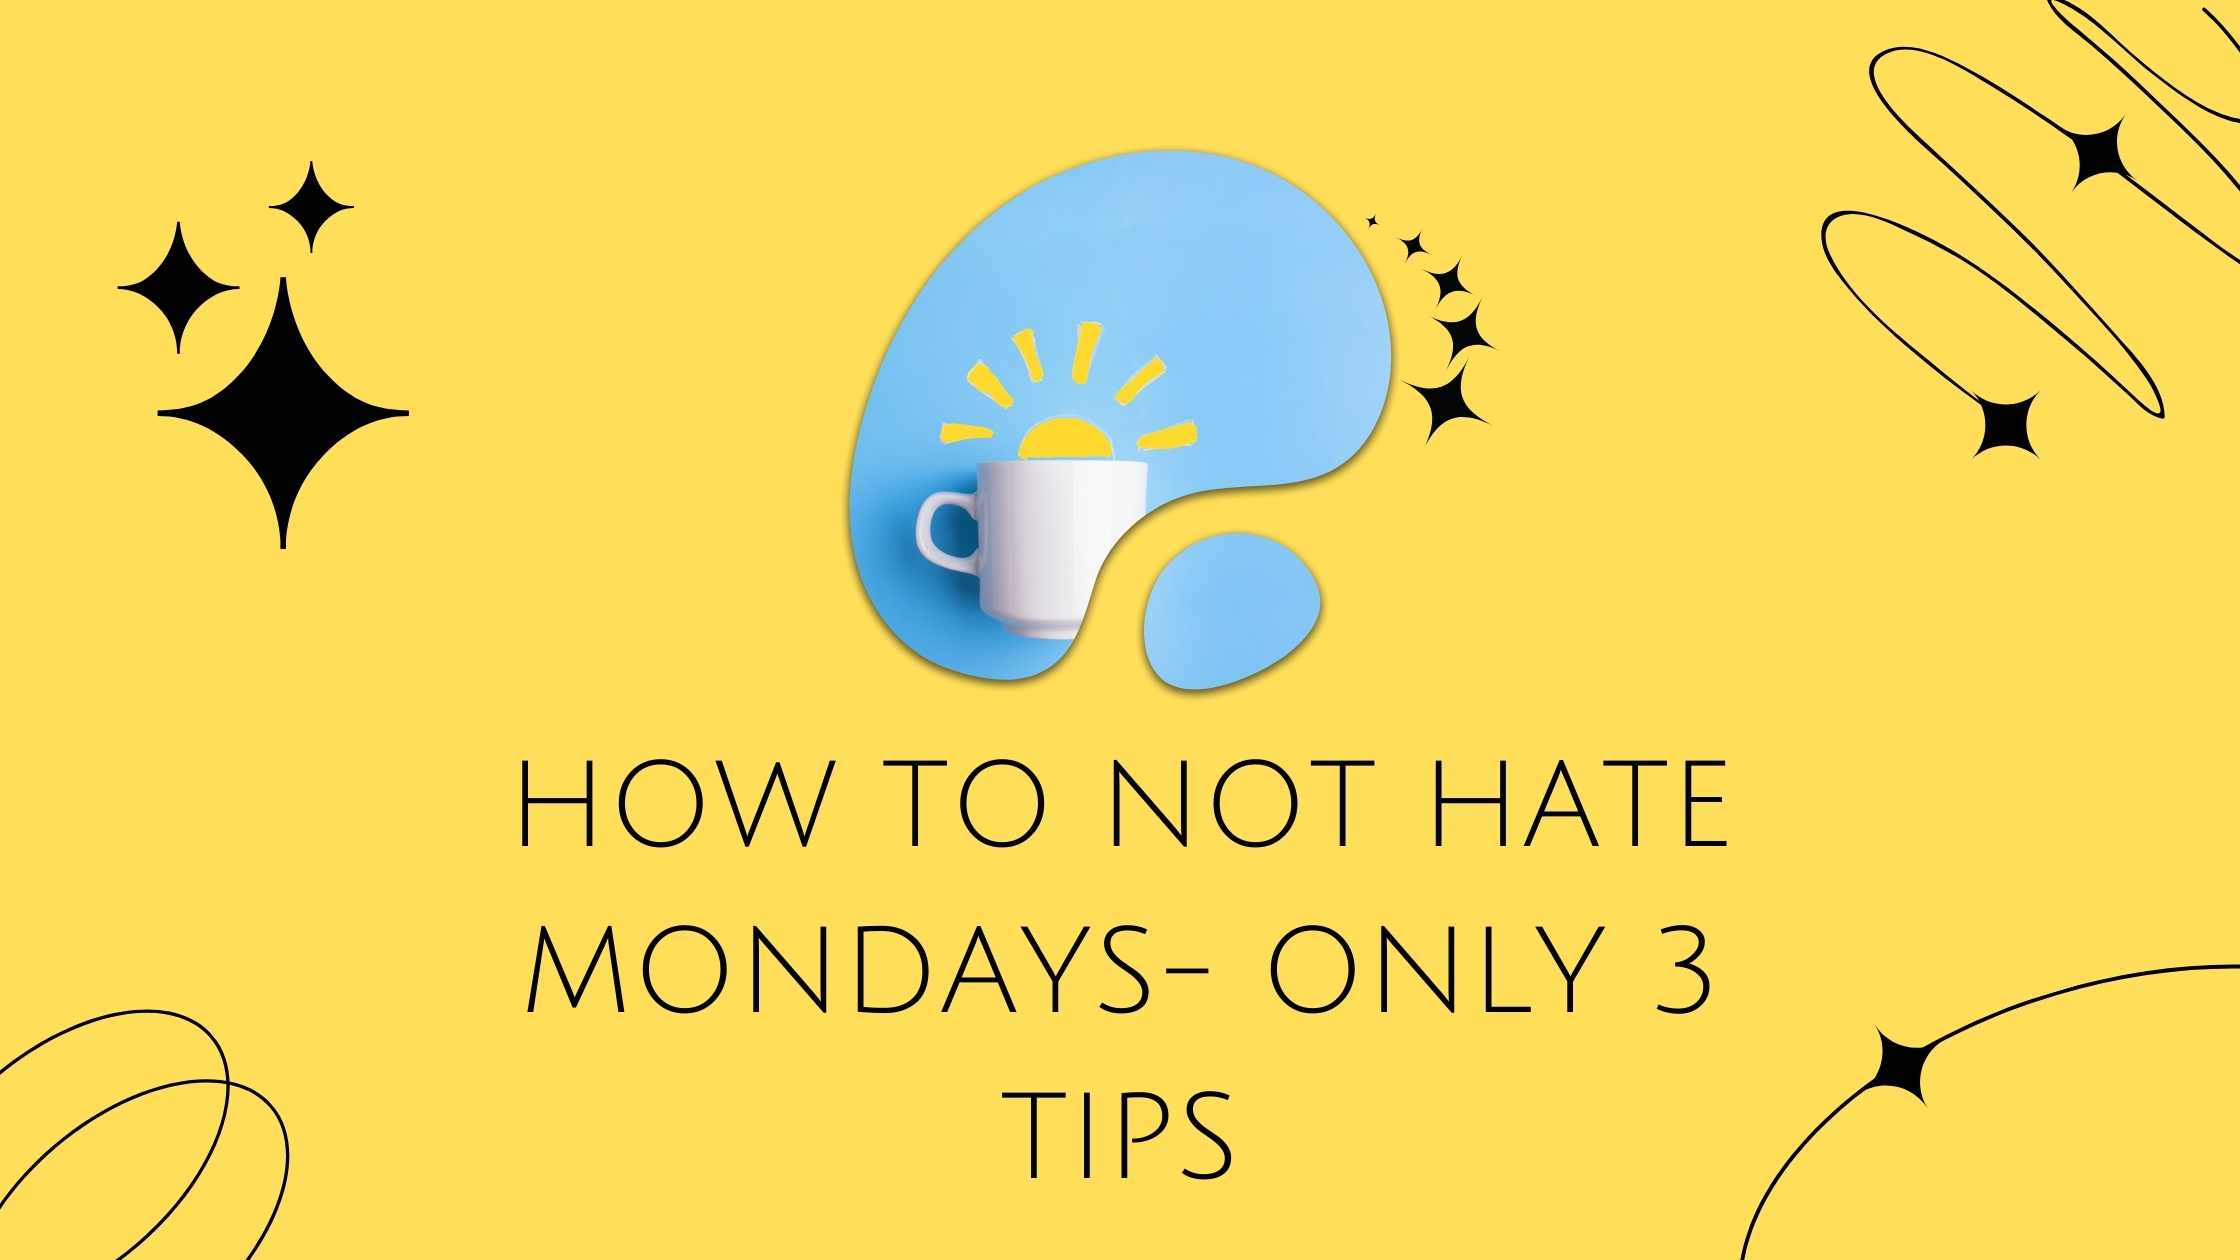 How to not hate Mondays- Only 3 tips